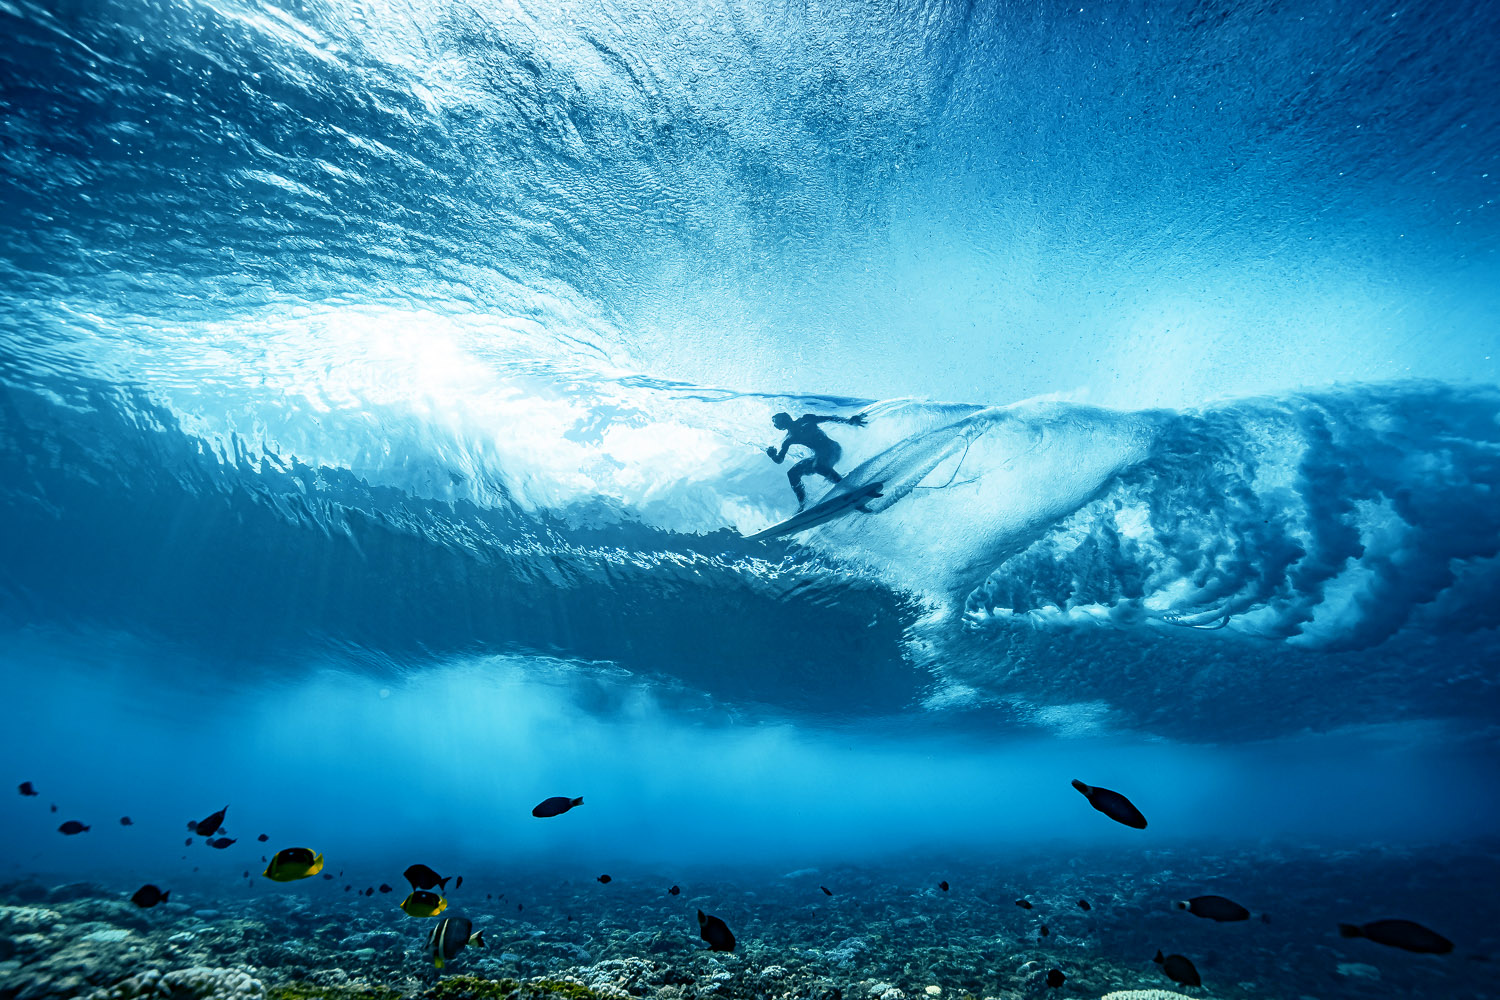 Man surfing shot from underwater with fish and coral